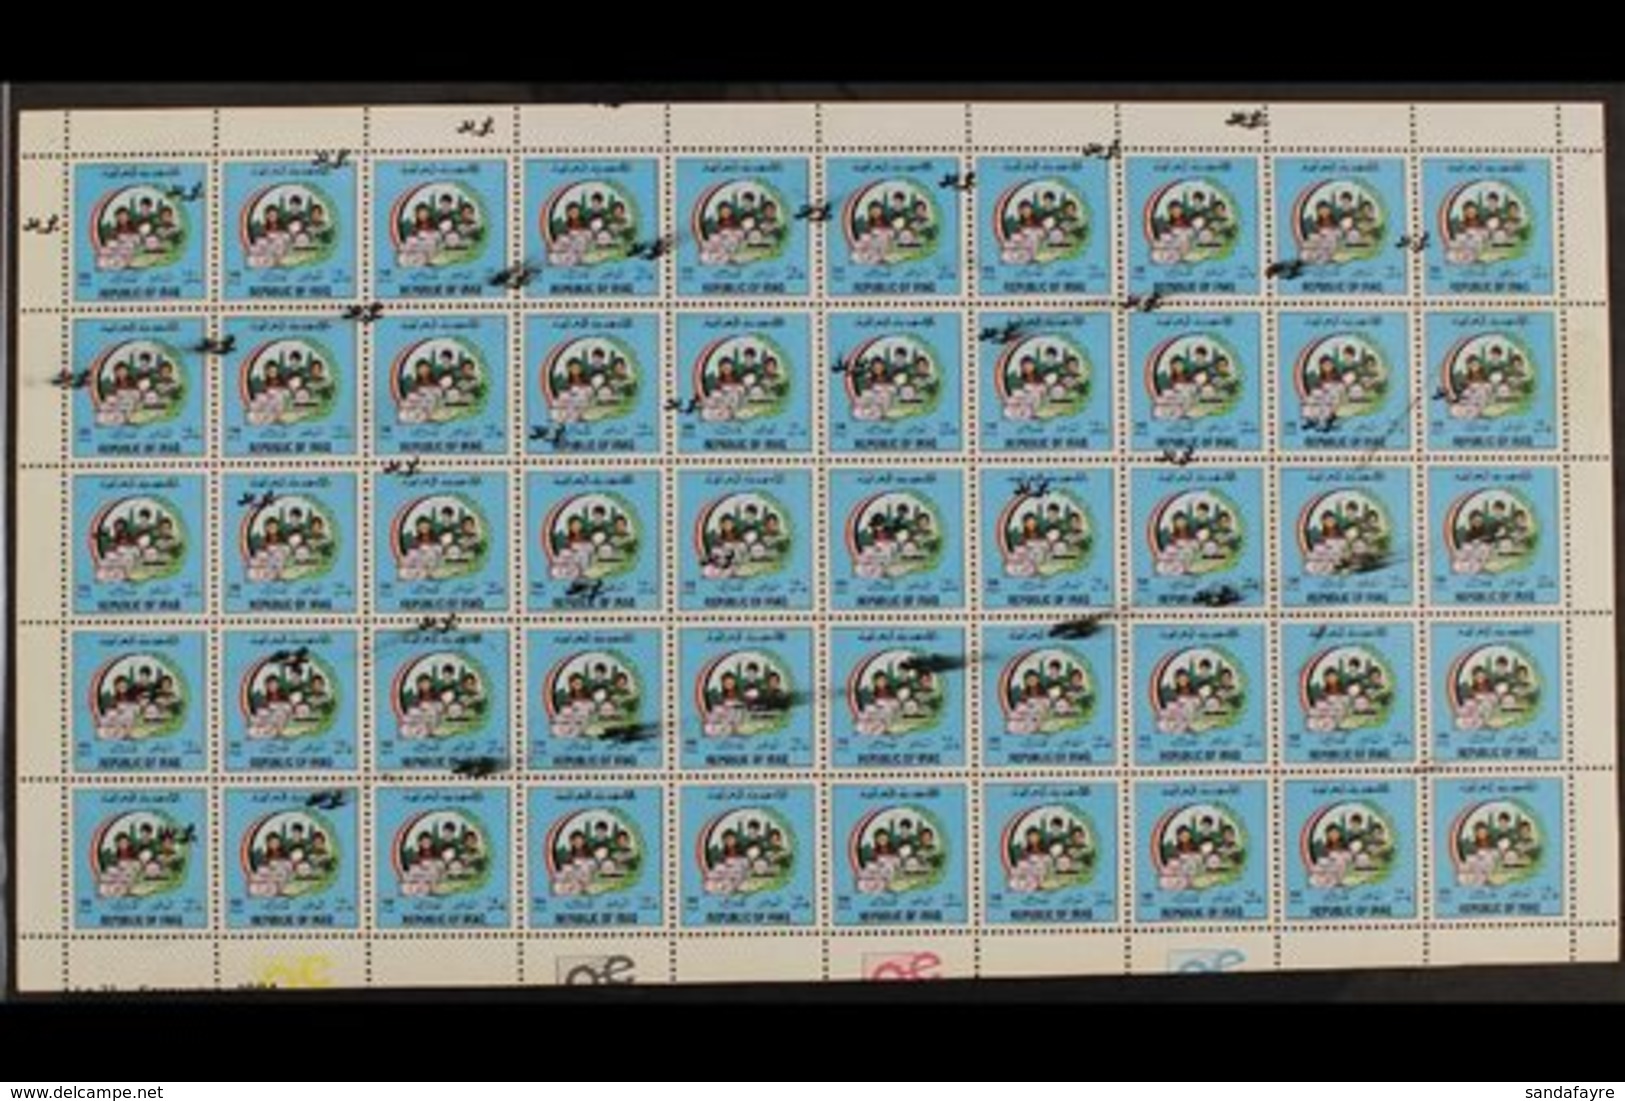 1989  150f Postal Savings Bank Overprint, SG 1861, Never Hinged Mint COMPLETE SHEET Of 50 With Dramatically MISPLACED DI - Iraq